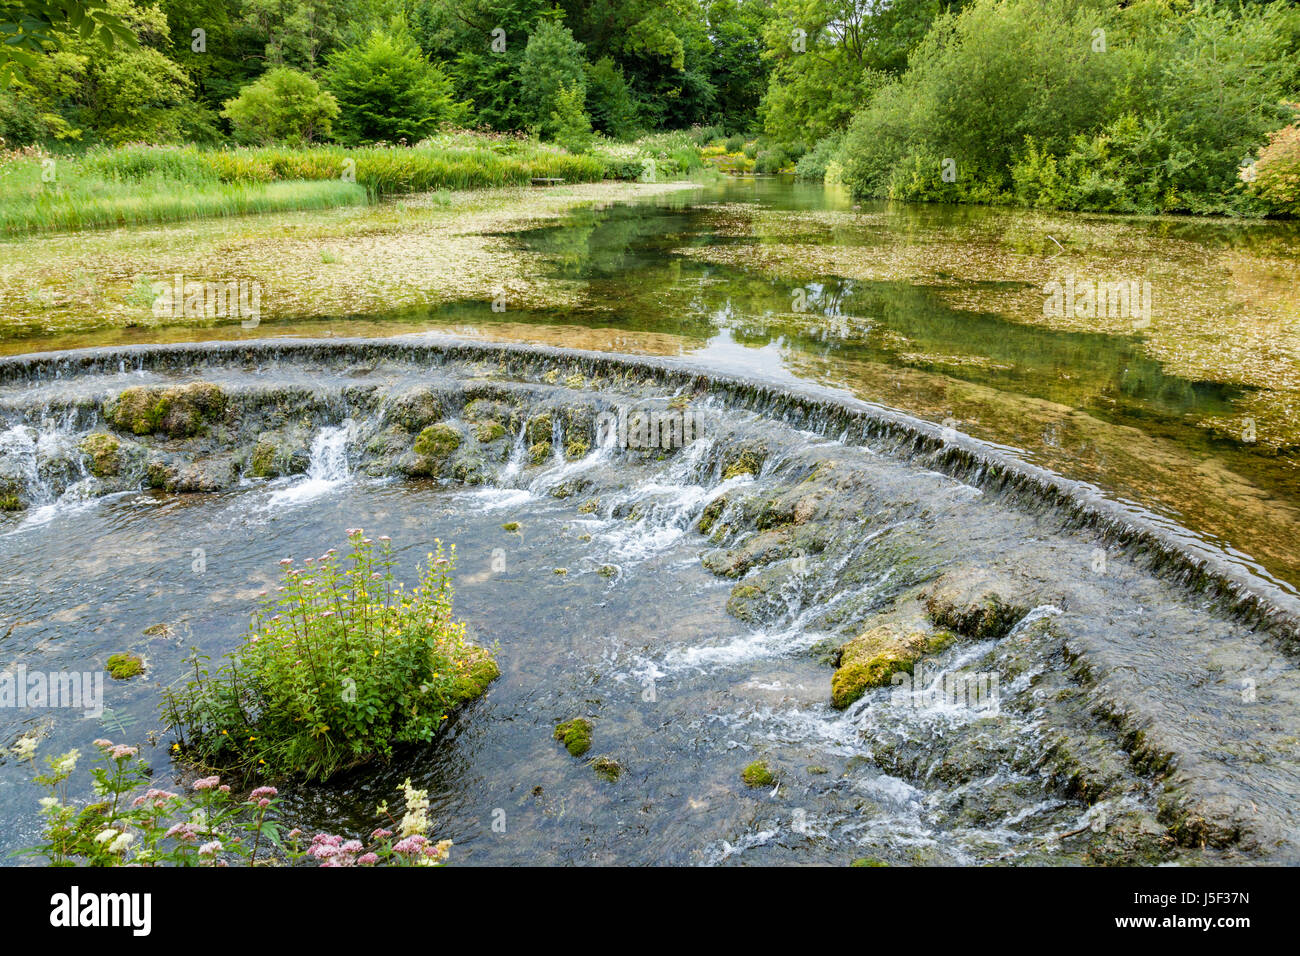 Semi circular weir on the River Lathkill in Lathkill Dale, Derbyshire, Peak District National Park, England, UK Stock Photo